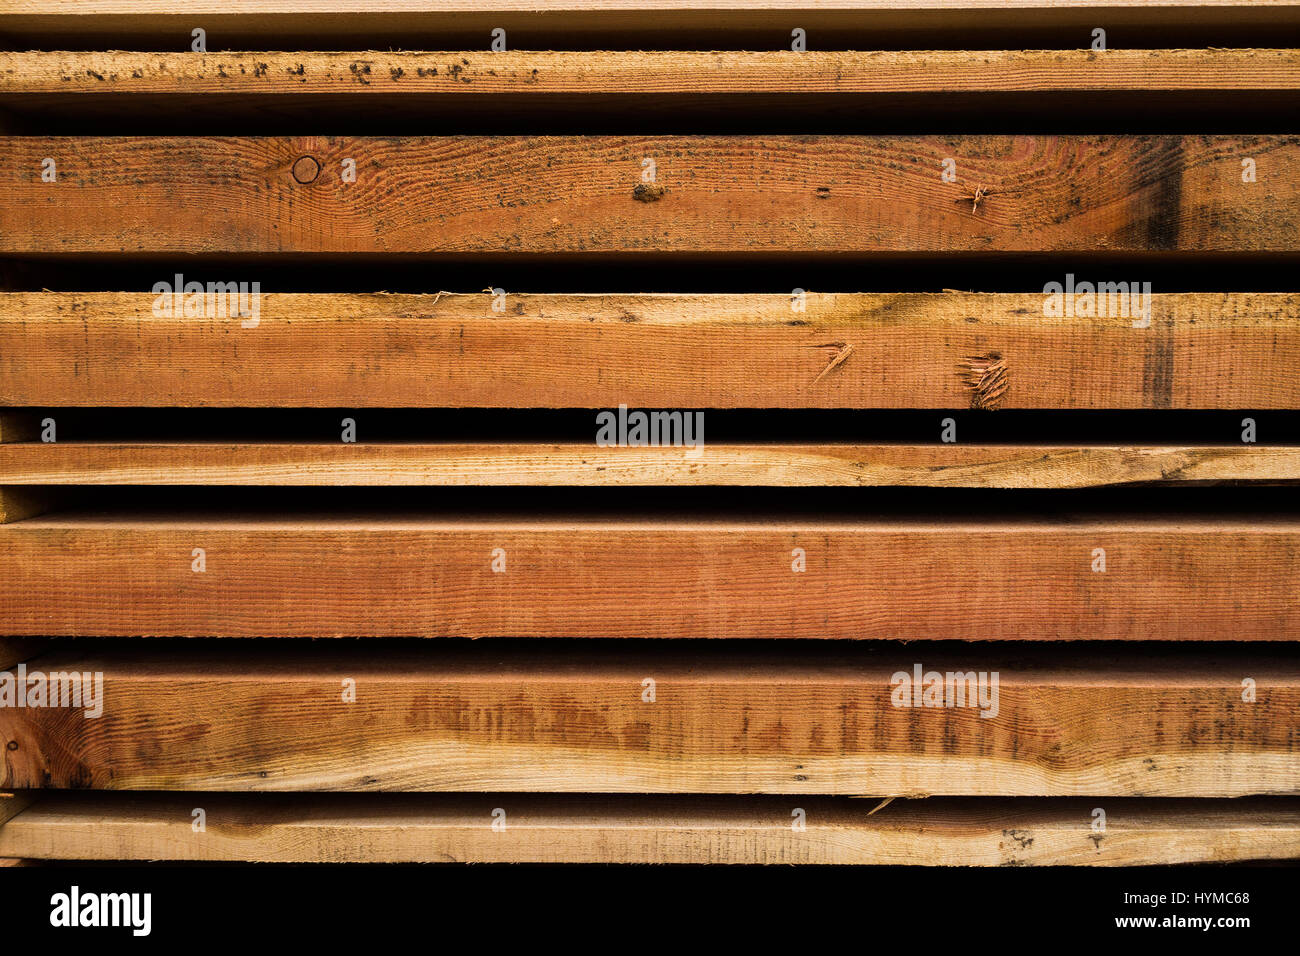 Wooden planks cut at sawmill and stacked in pile ready for use as building material Stock Photo